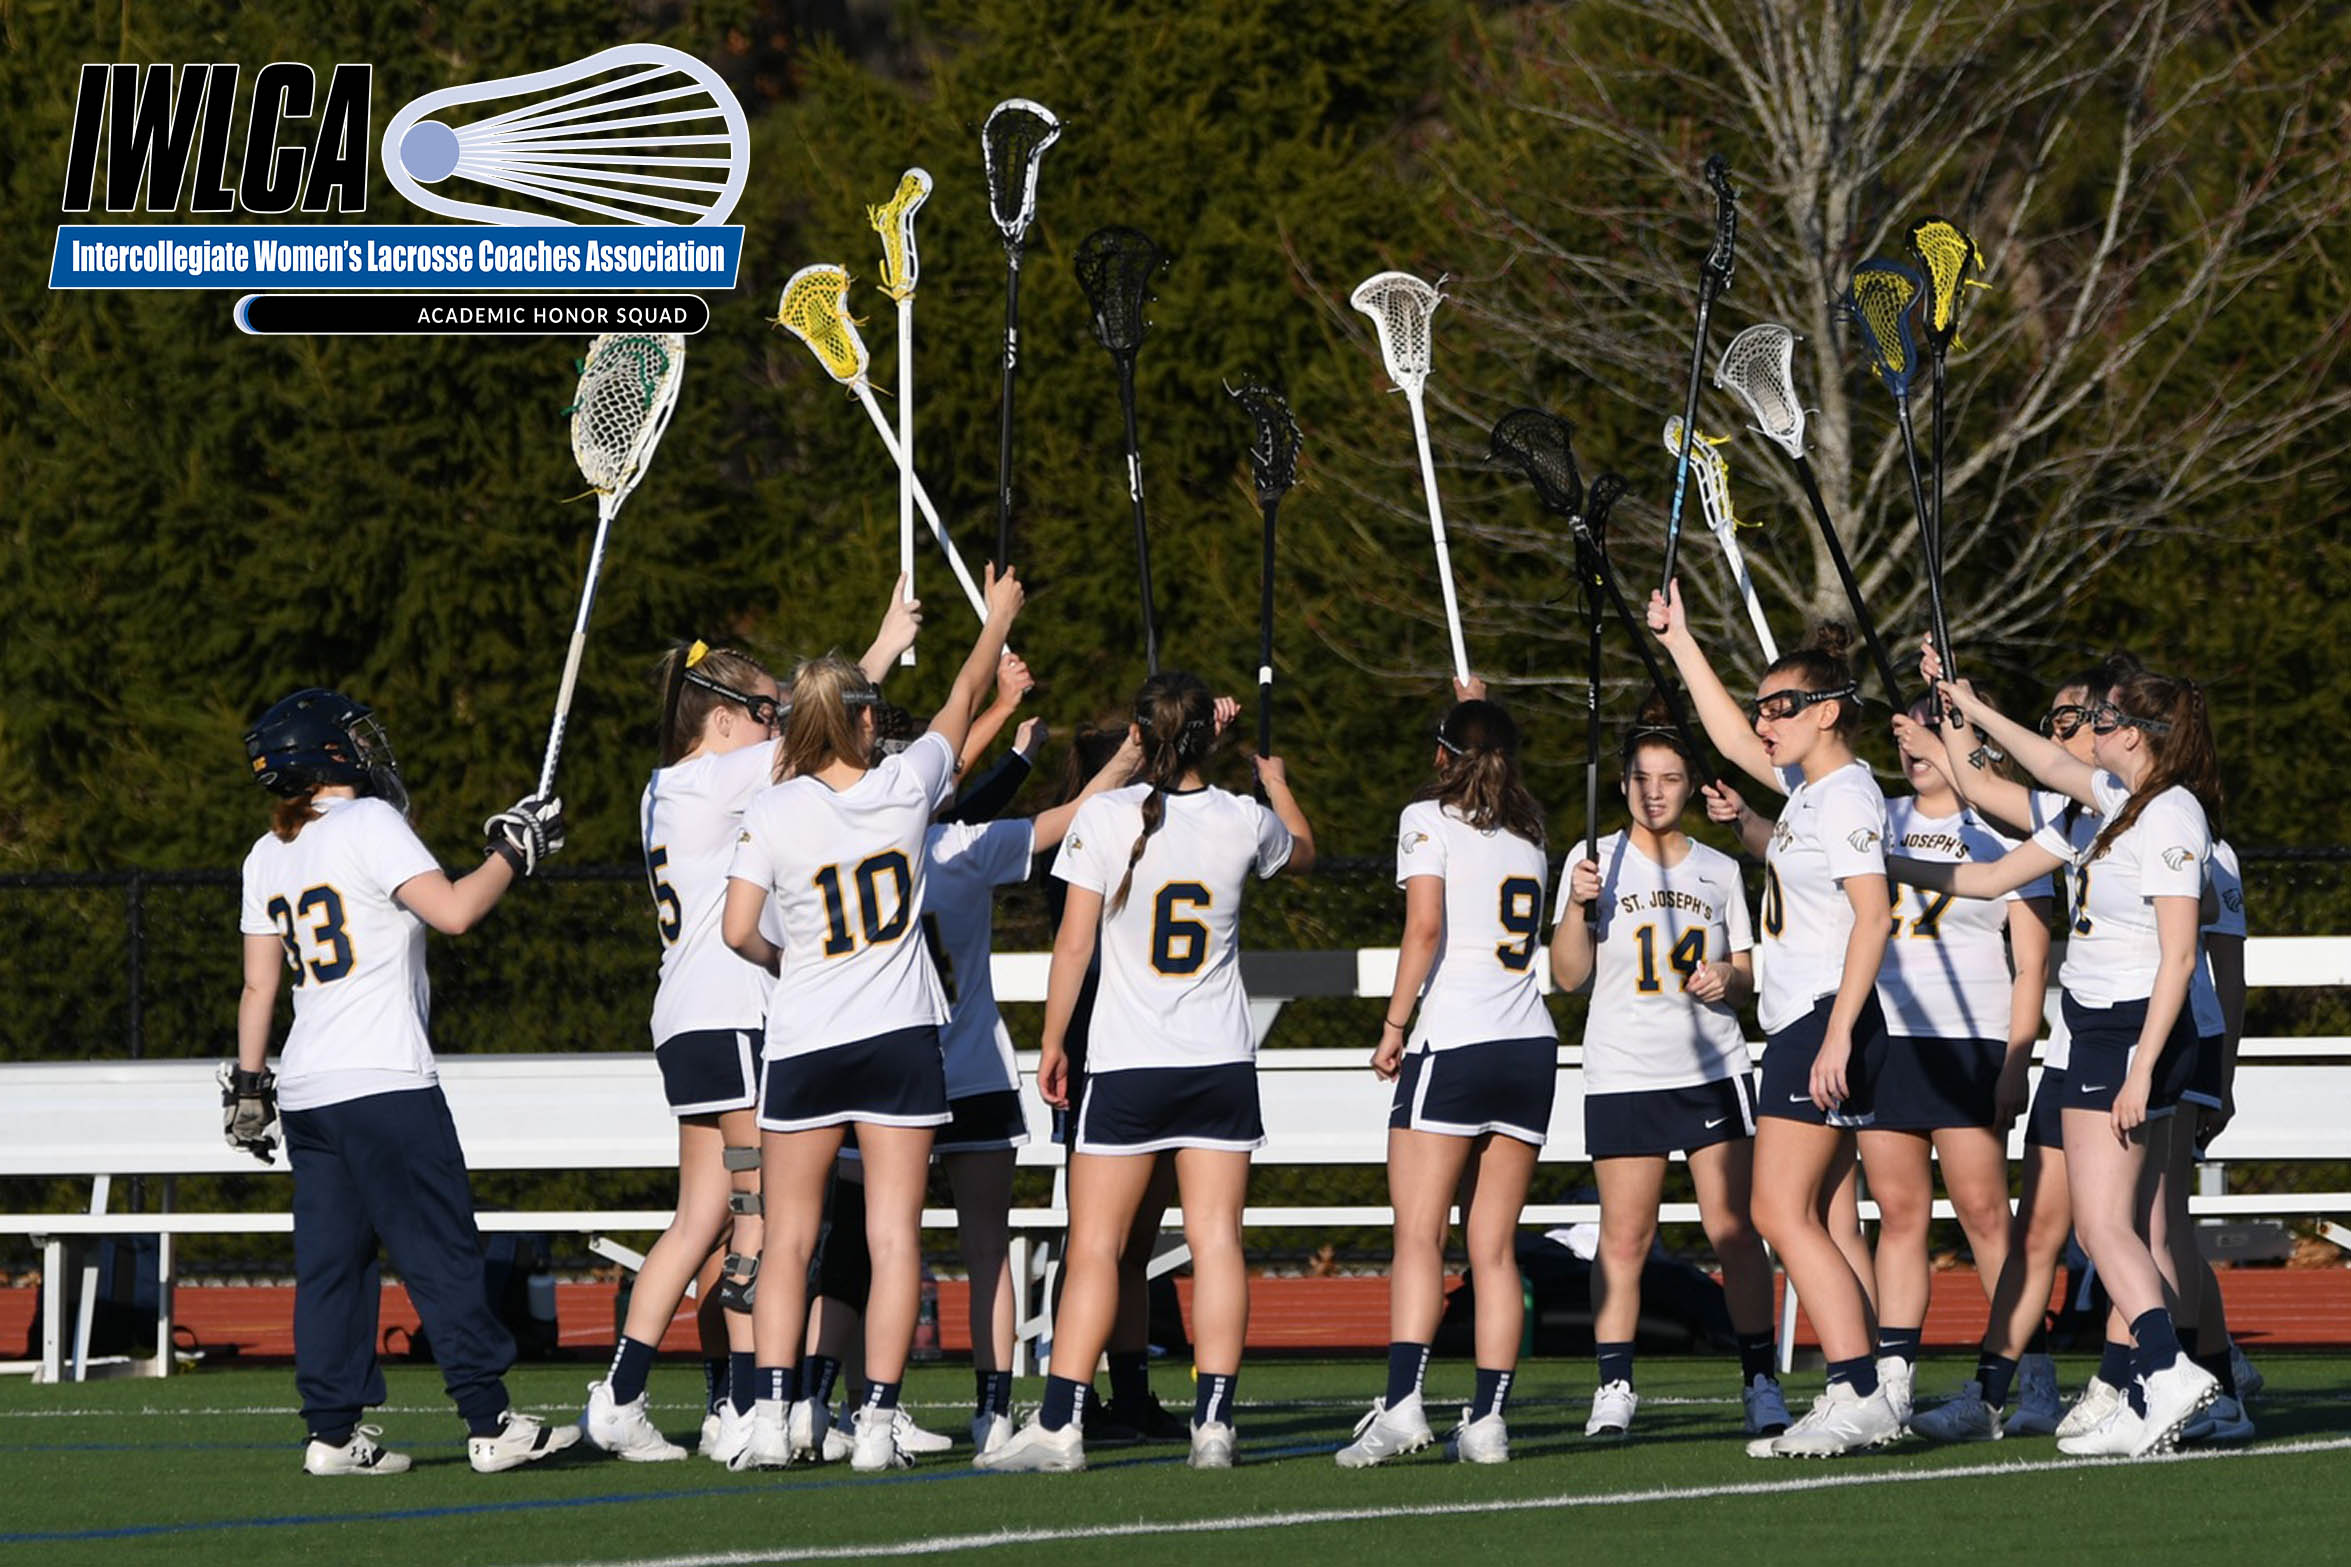 Women's Lacrosse Earns IWLCA Academic Honor Squad Recognition